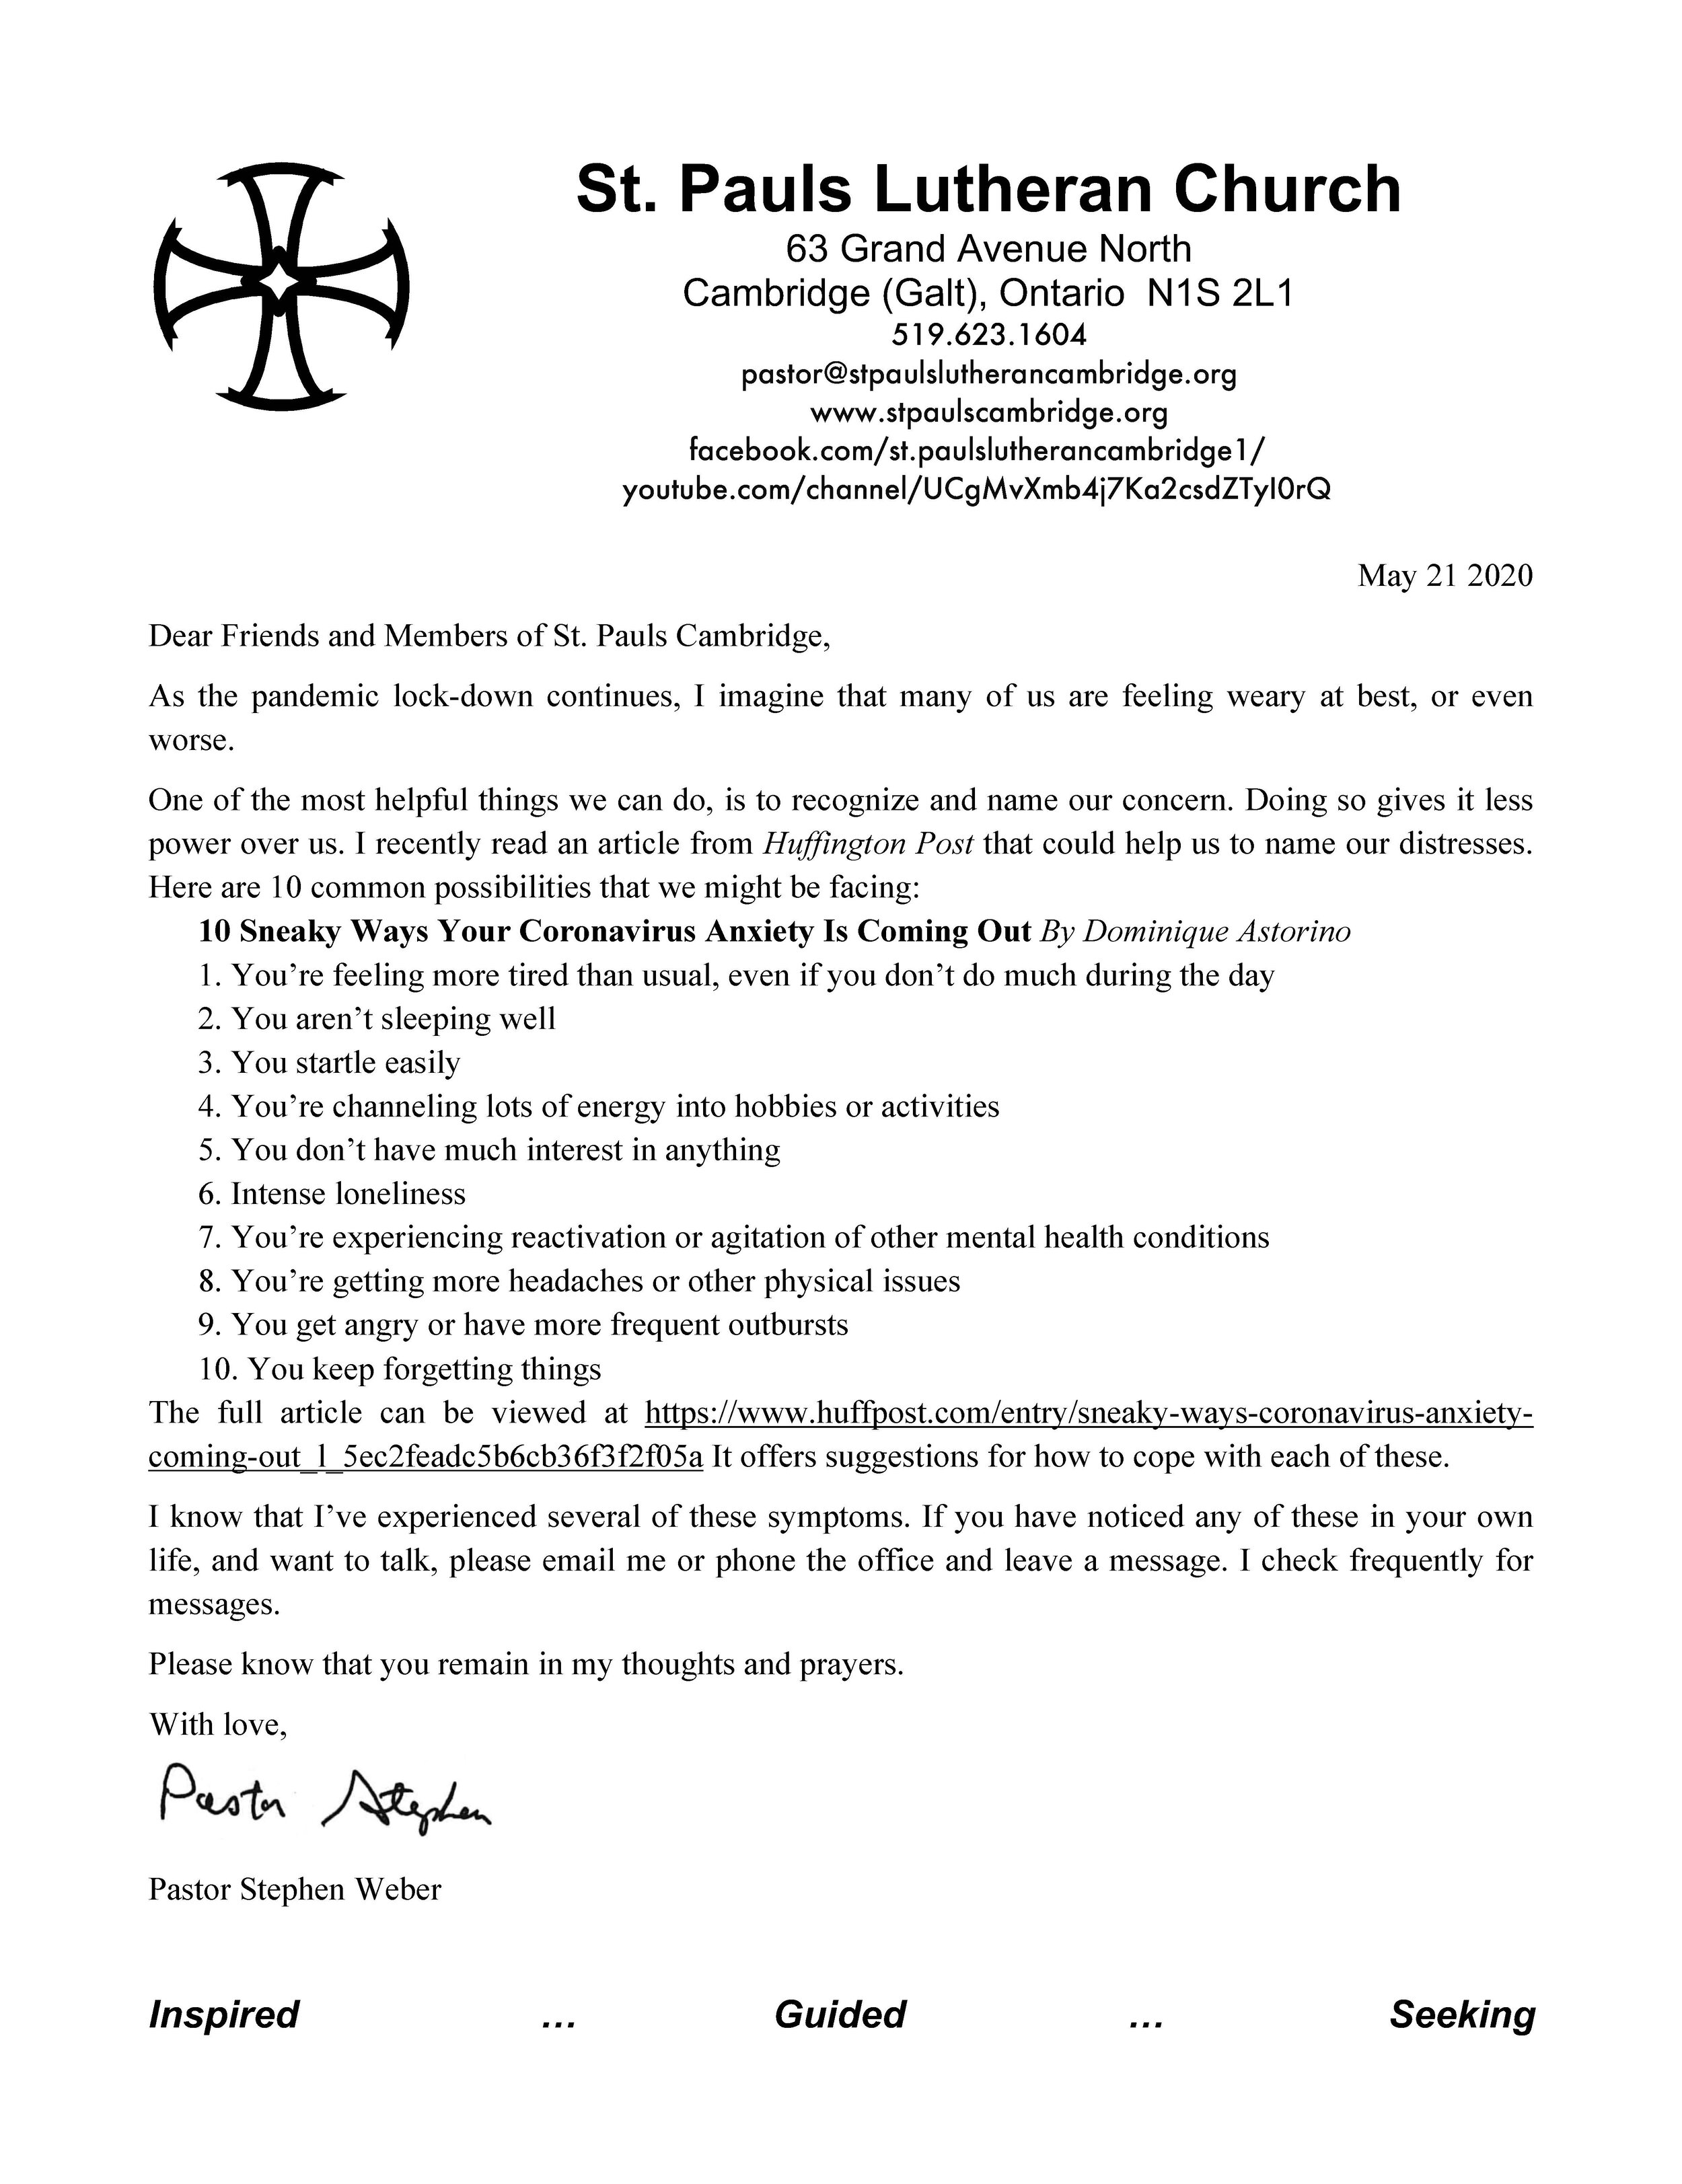 Pastoral Letter - Weary or Worse - May 21 2020.jpg